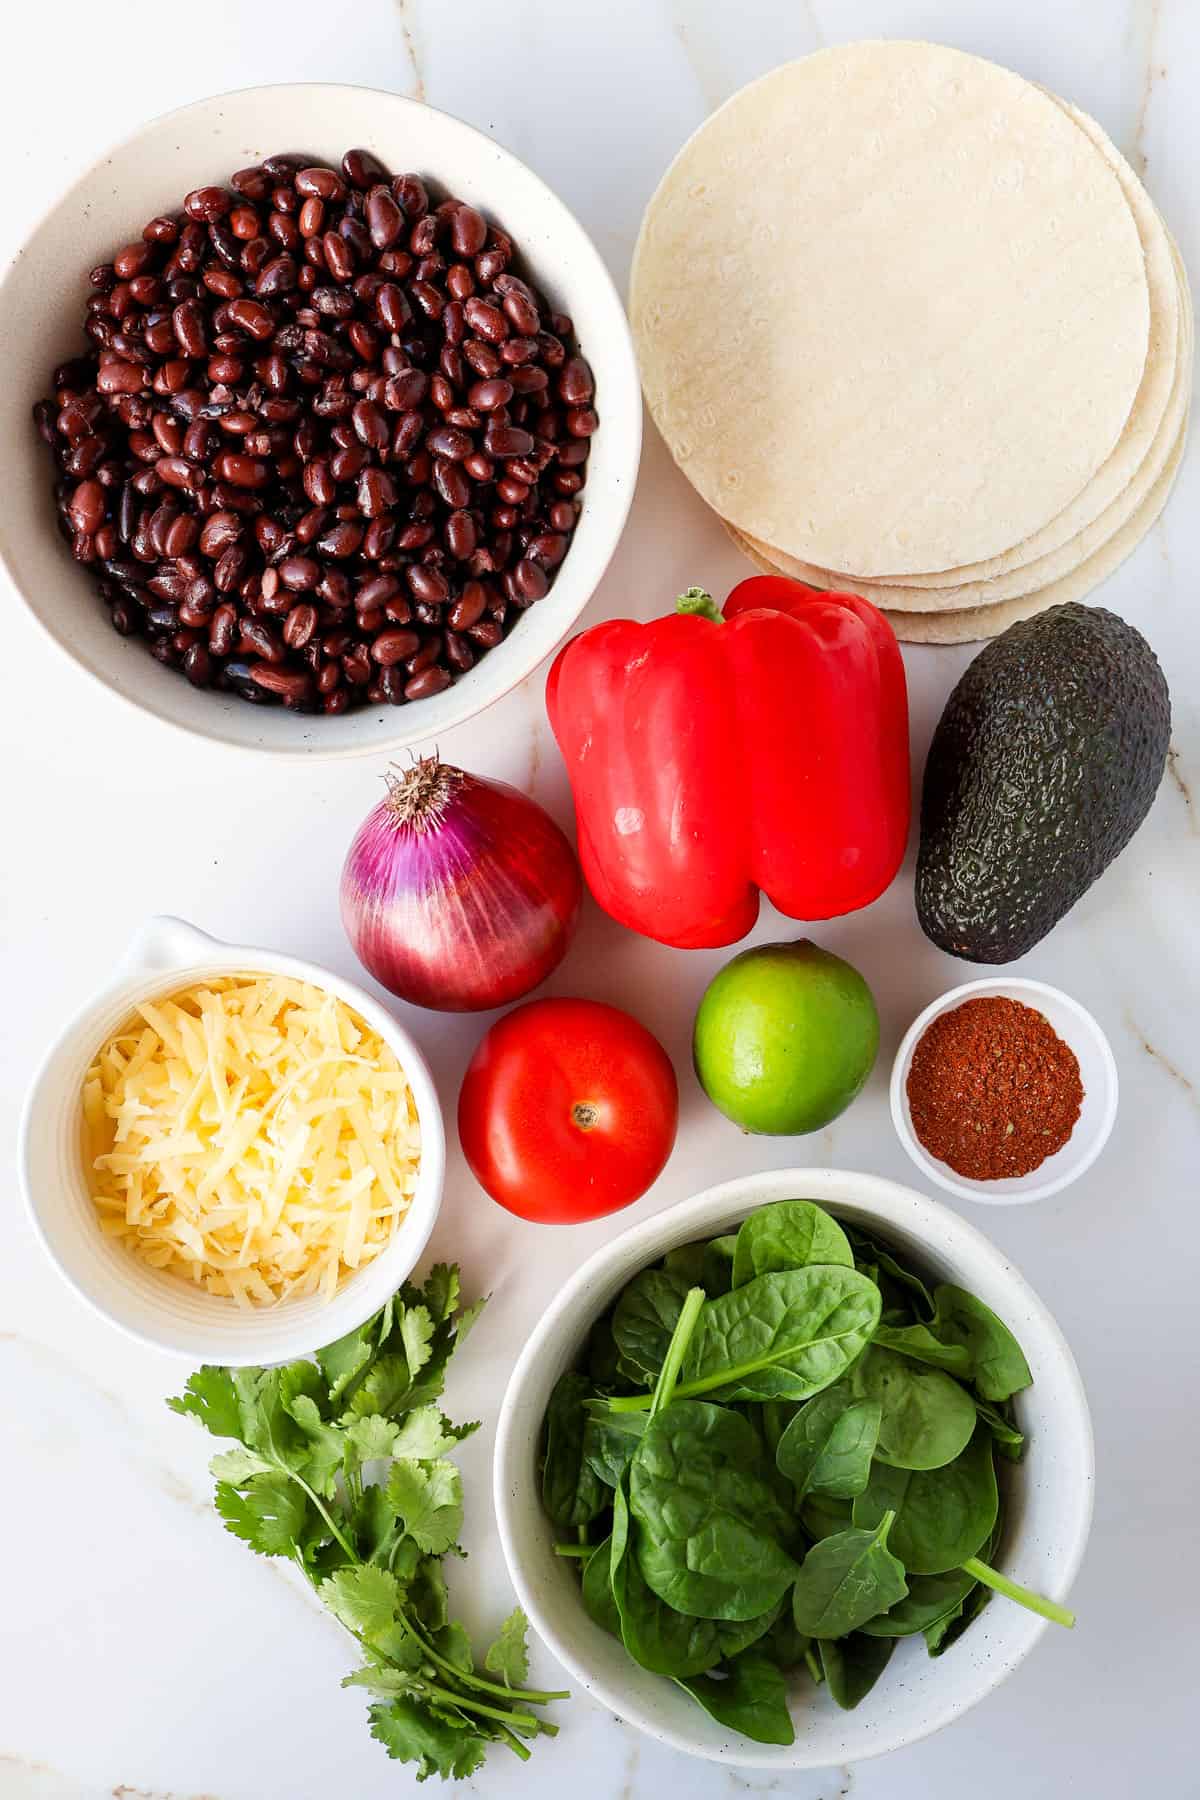 Ingredients shown to make the tacos.